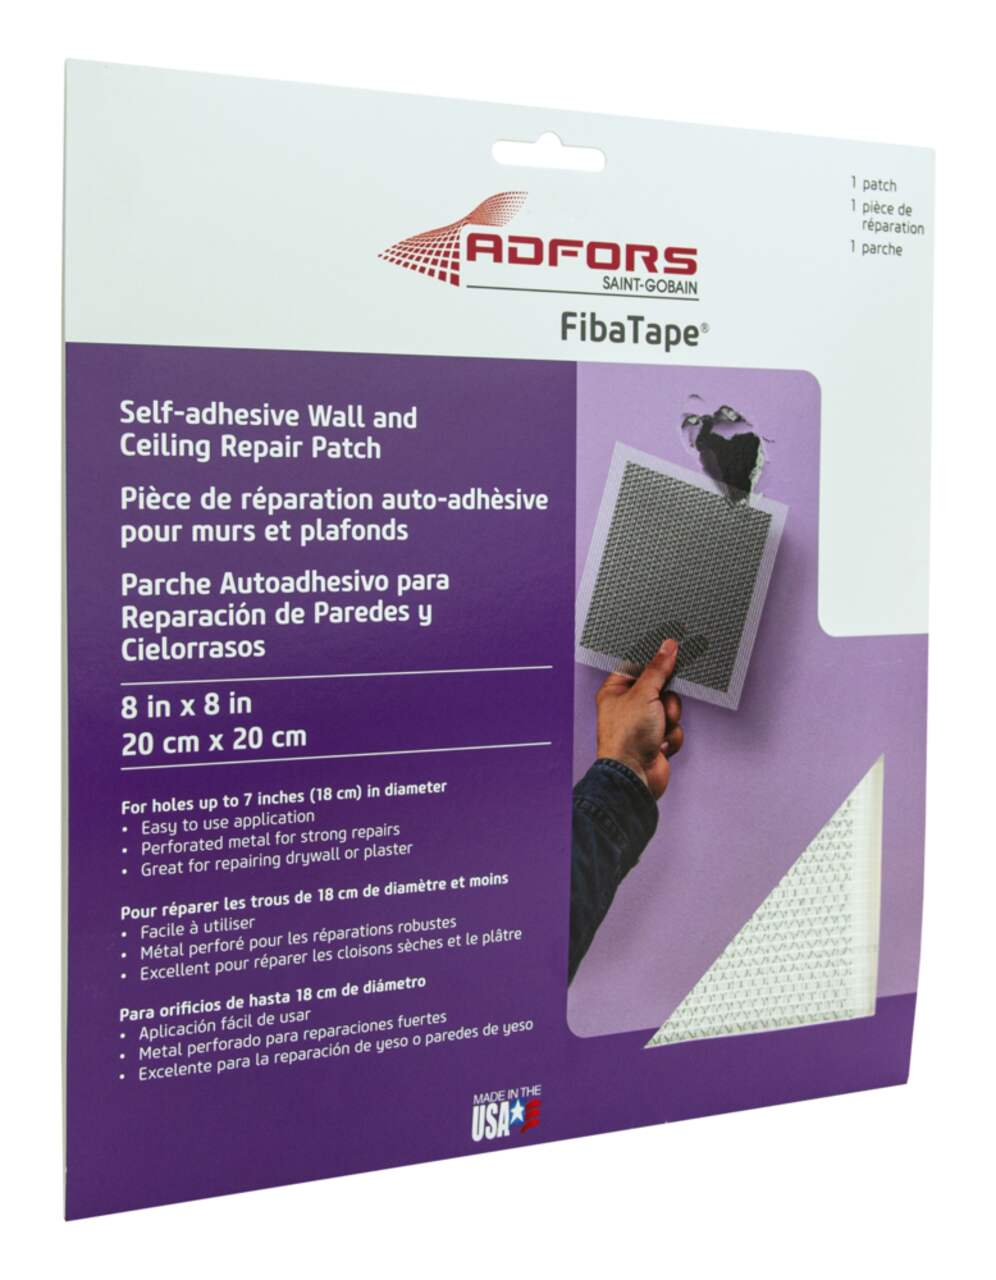 https://media-www.canadiantire.ca/product/fixing/paint/surface-prep-maintenance/0495122/8-x-8-wall-repair-patch-f2ee4c02-f4d6-4bcf-bae6-a749357aea8e.png?imdensity=1&imwidth=640&impolicy=mZoom